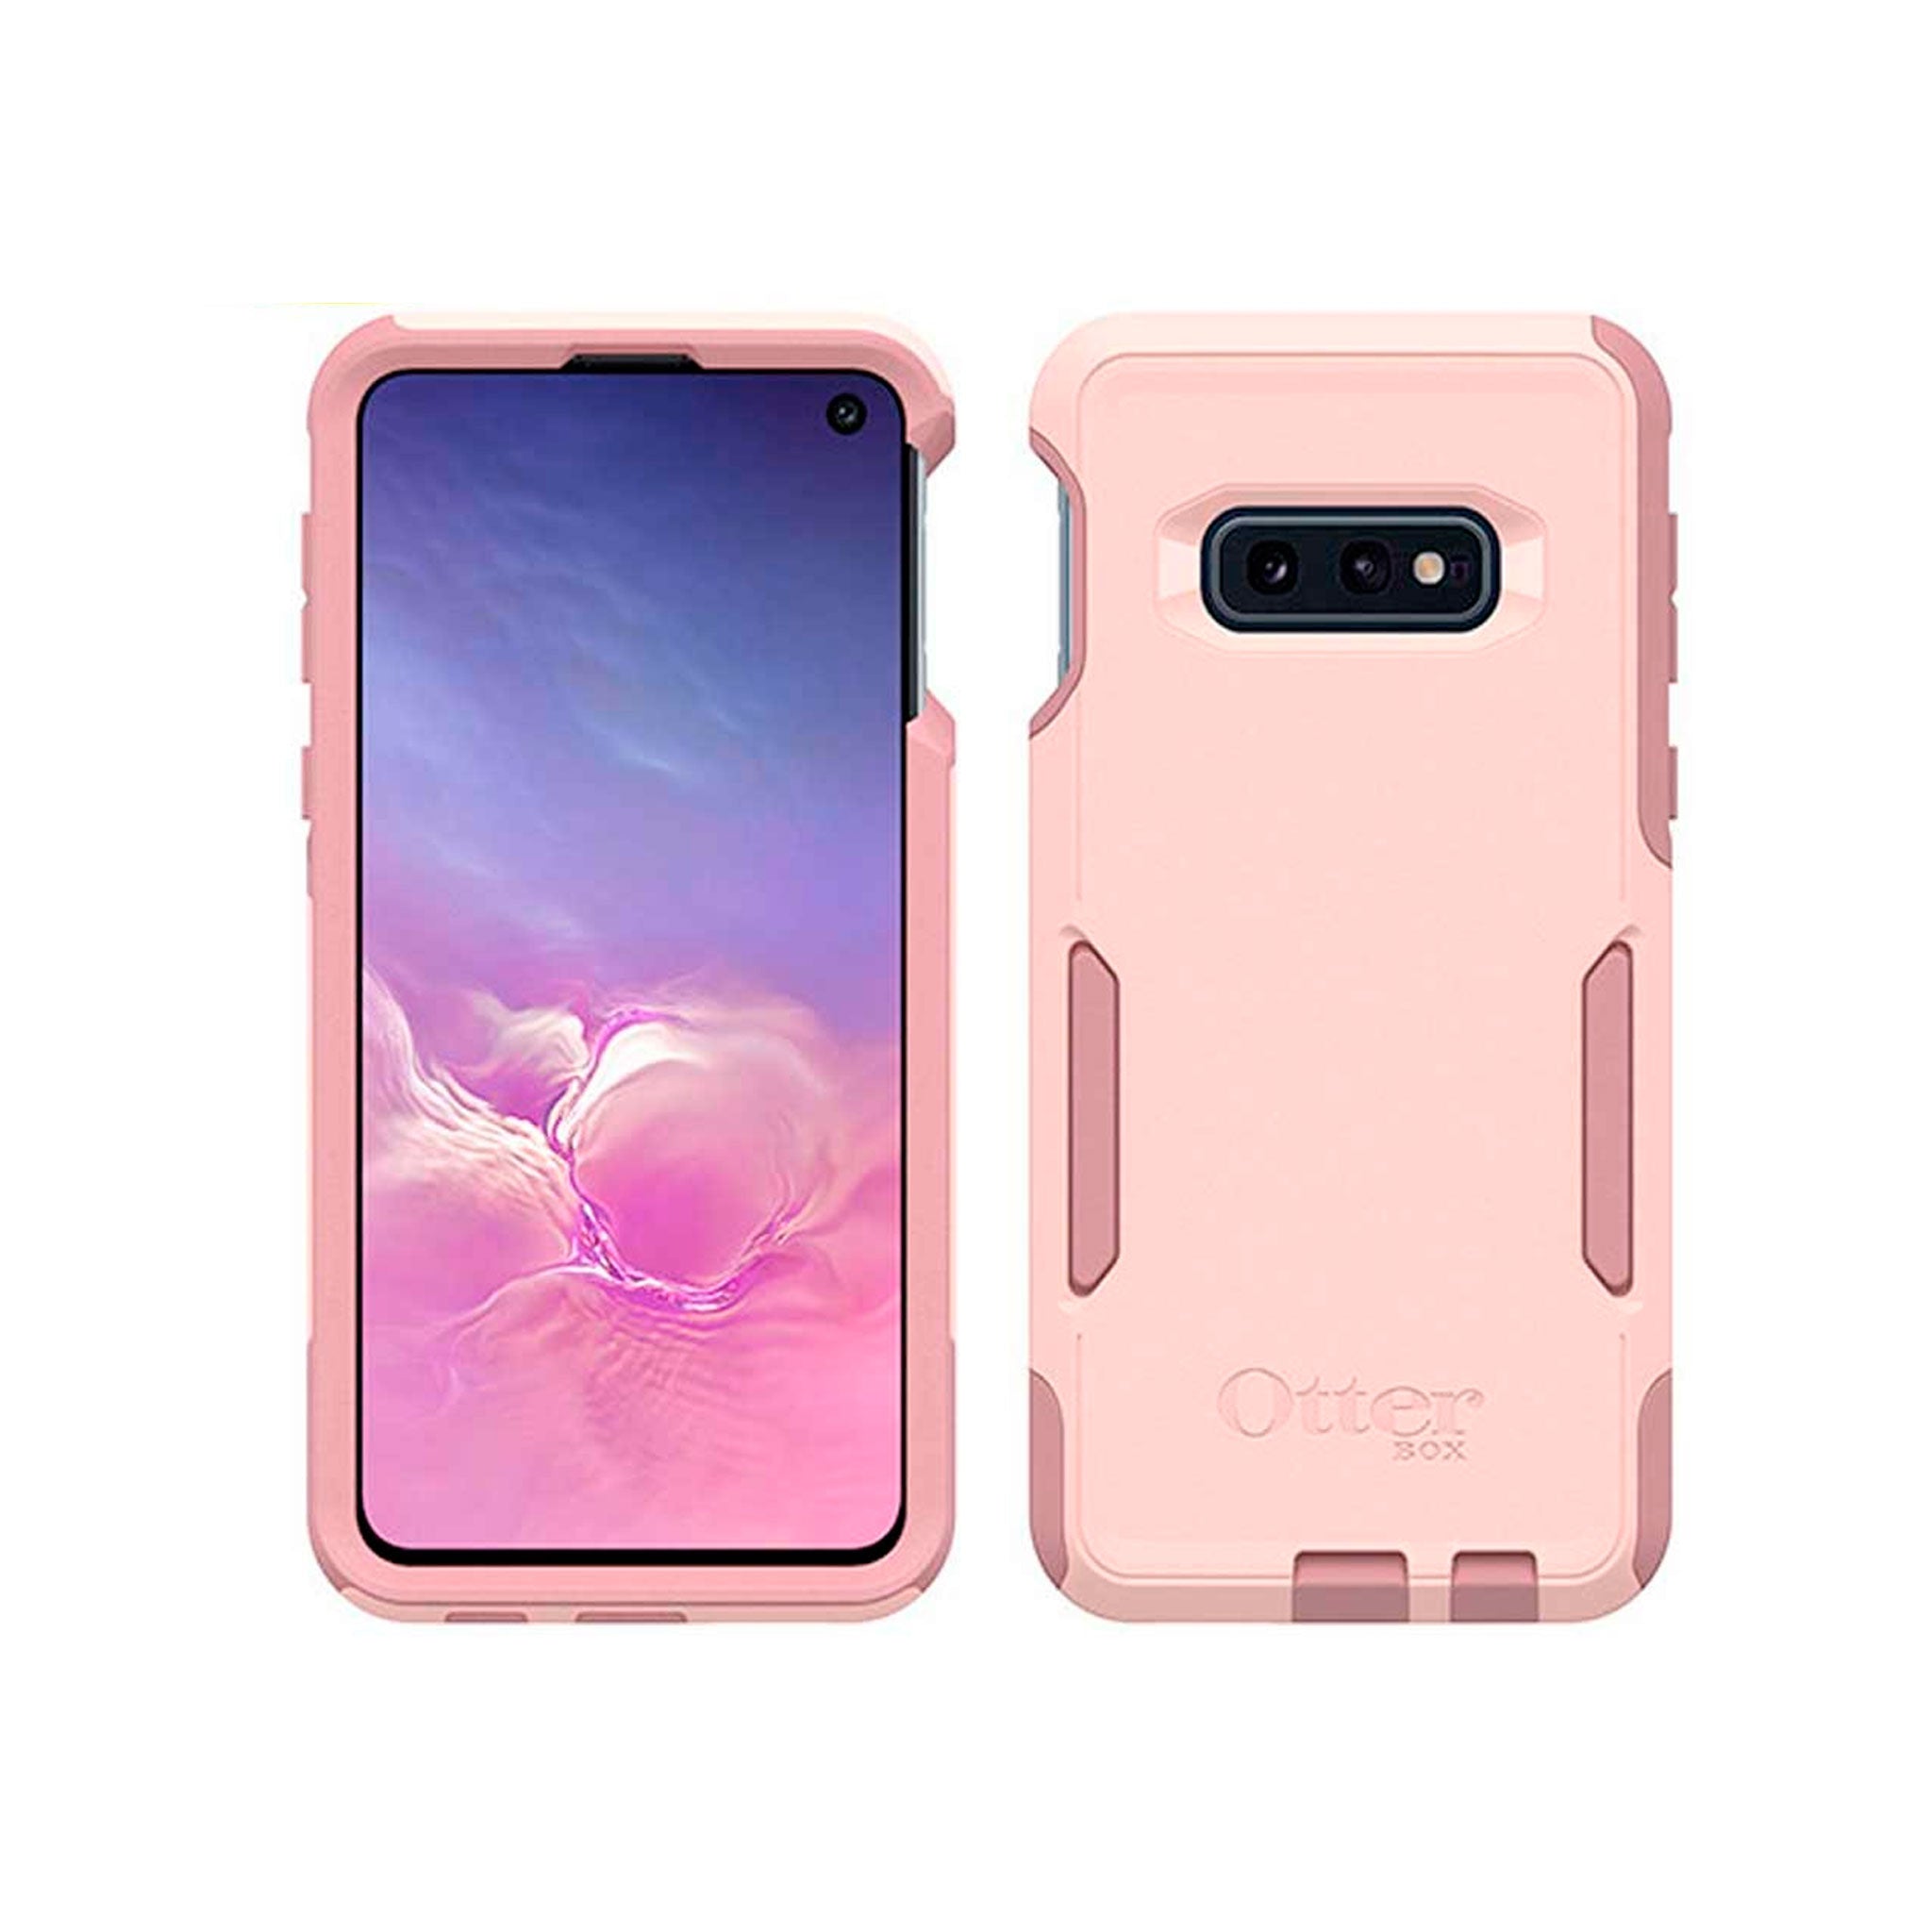 OtterBox - Commuter Series for Galaxy S10e - Ballet Way